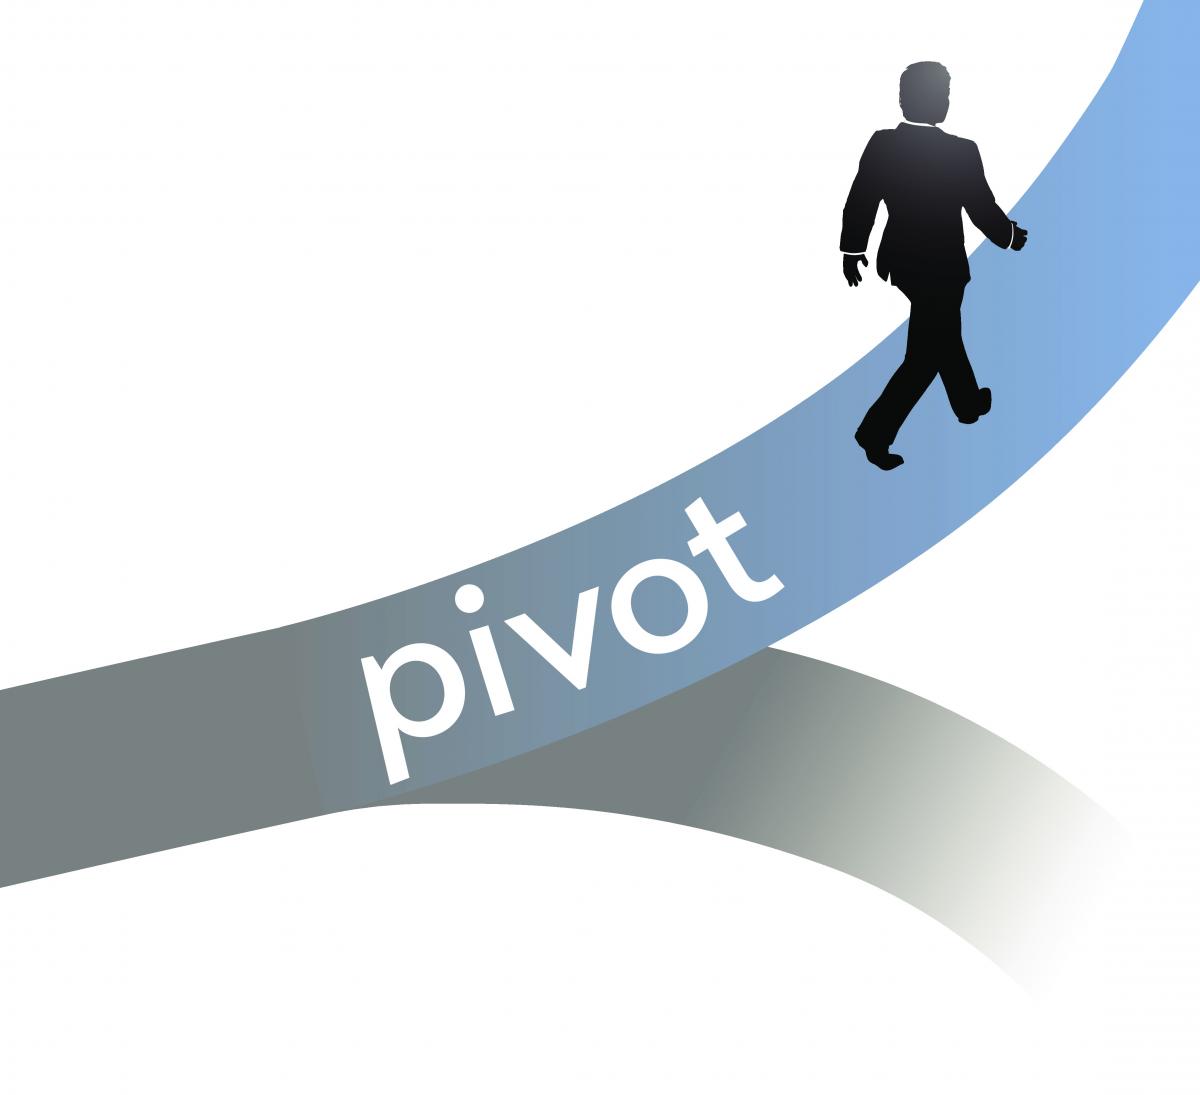 Look for the Pivot Points in Your Life